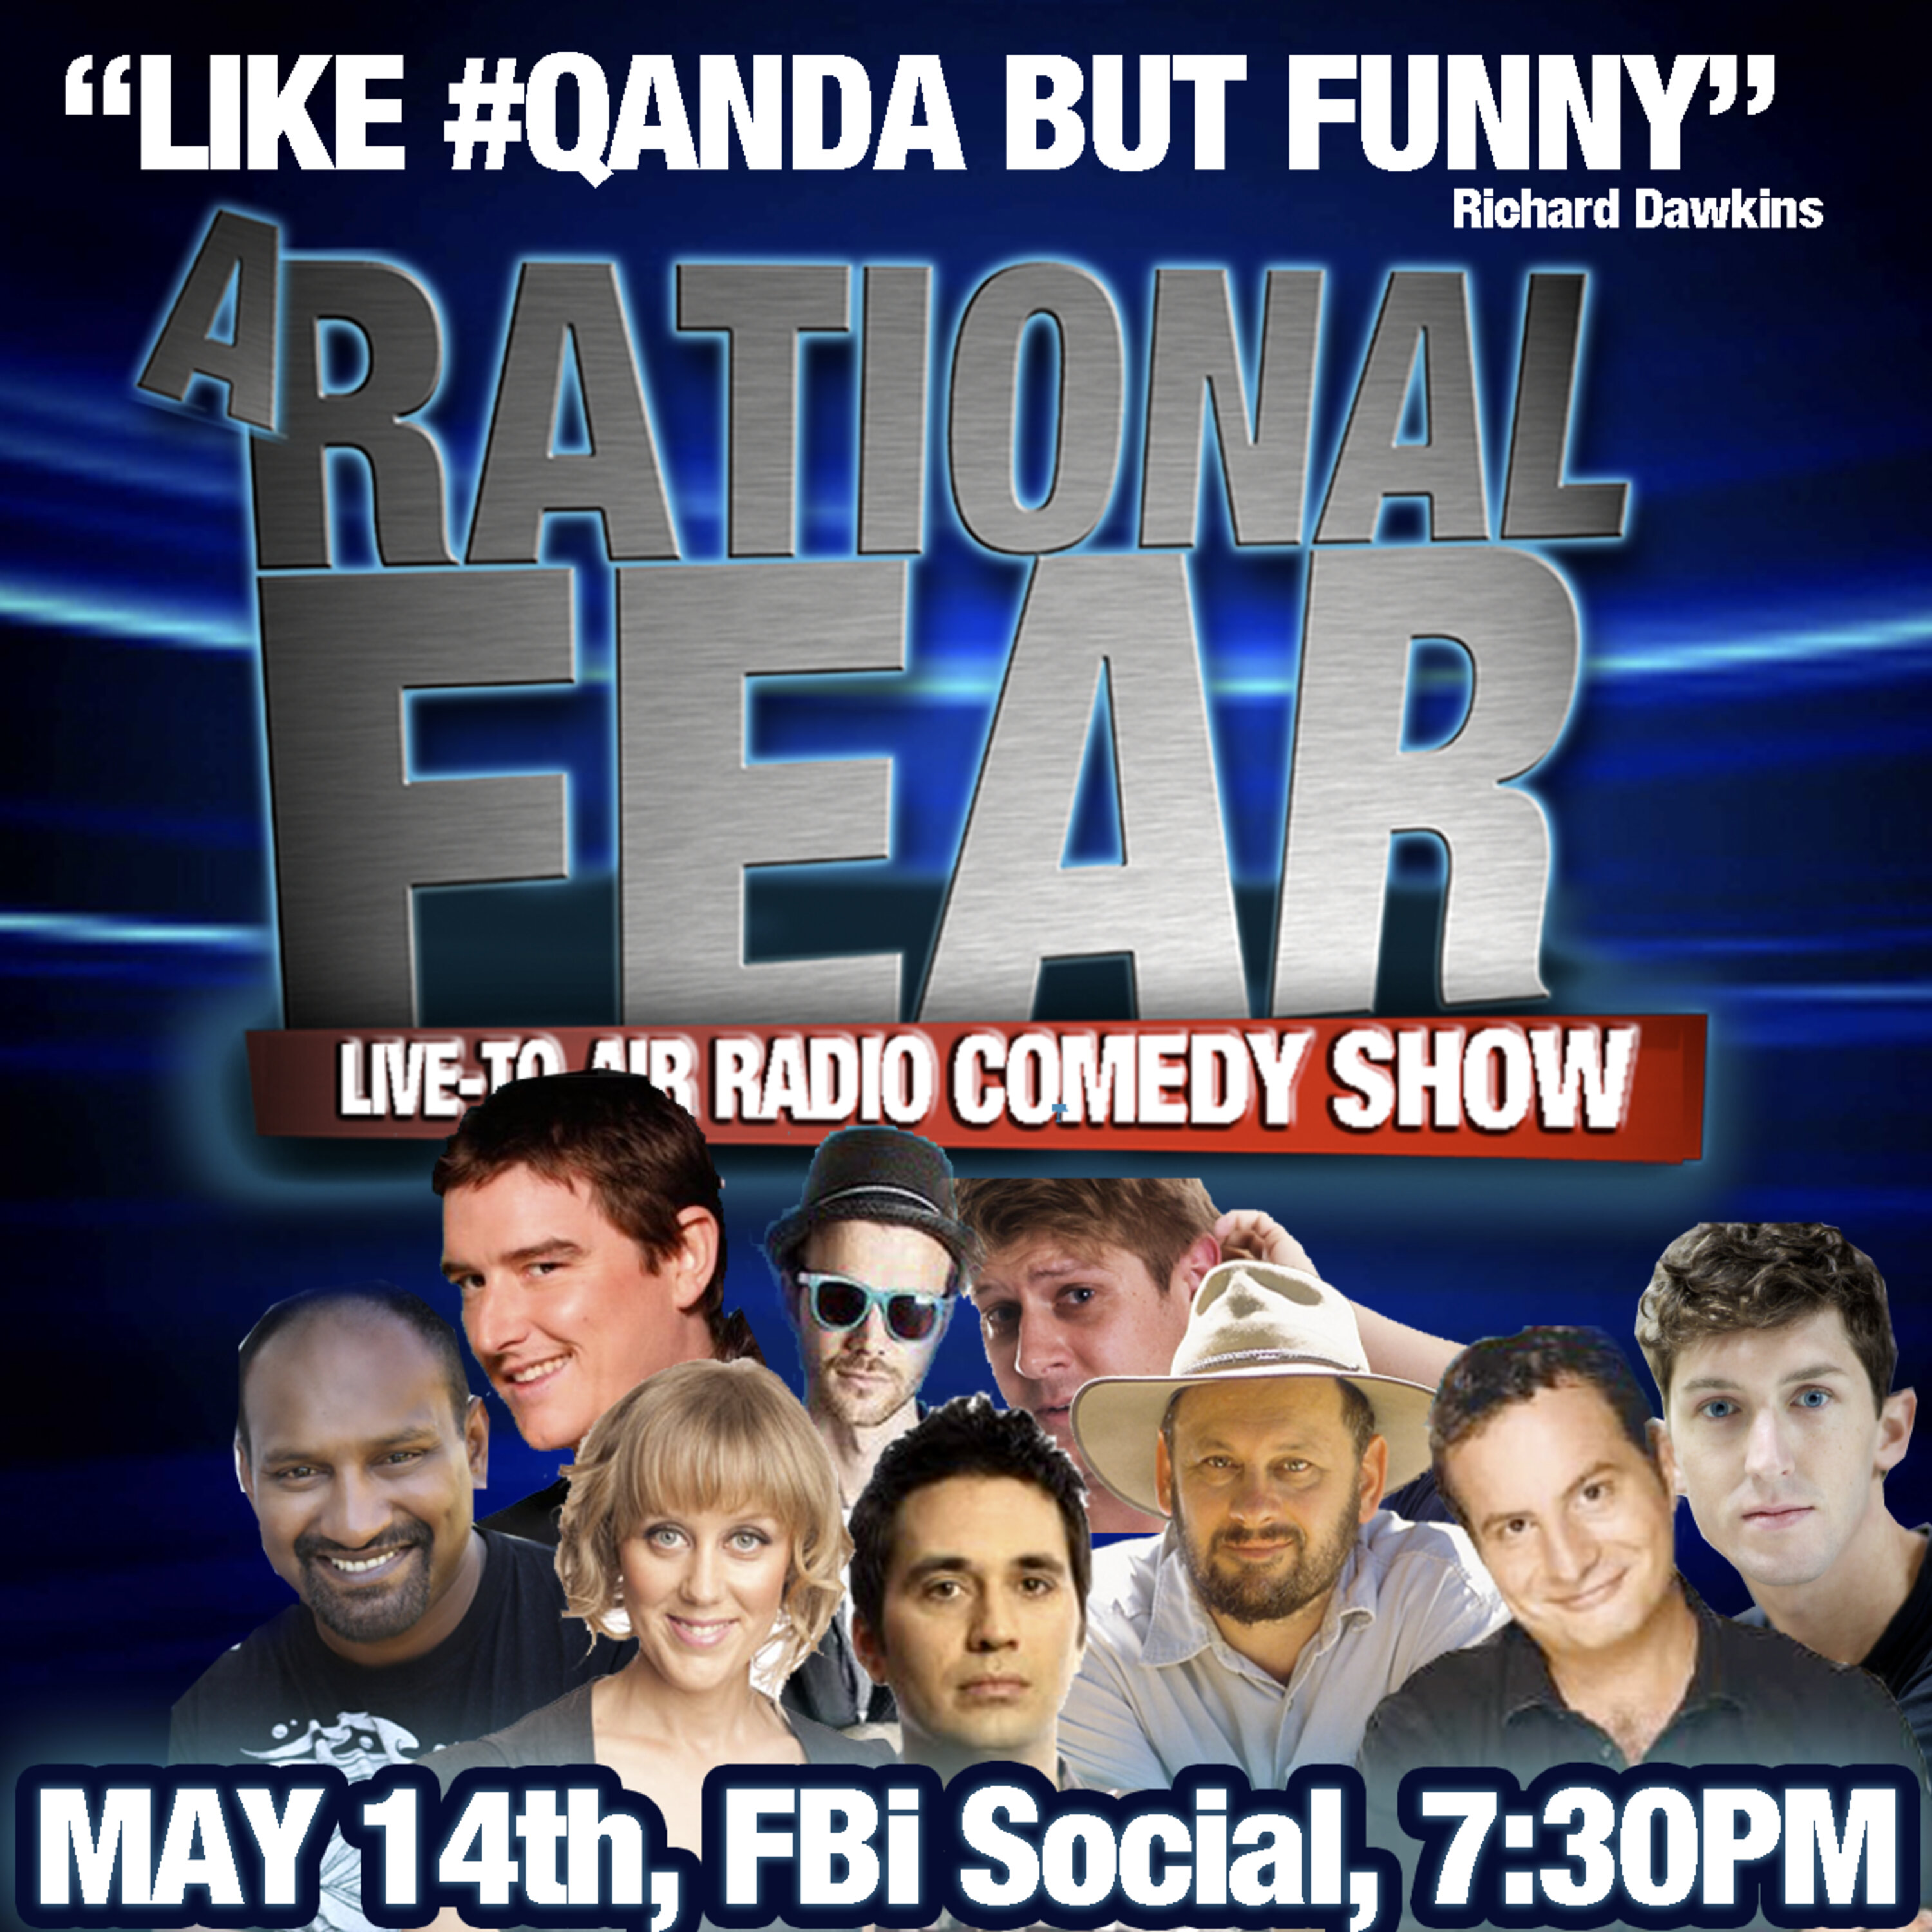 #0003 - May 14 2012 - A Rational Fear LIVE 3.0